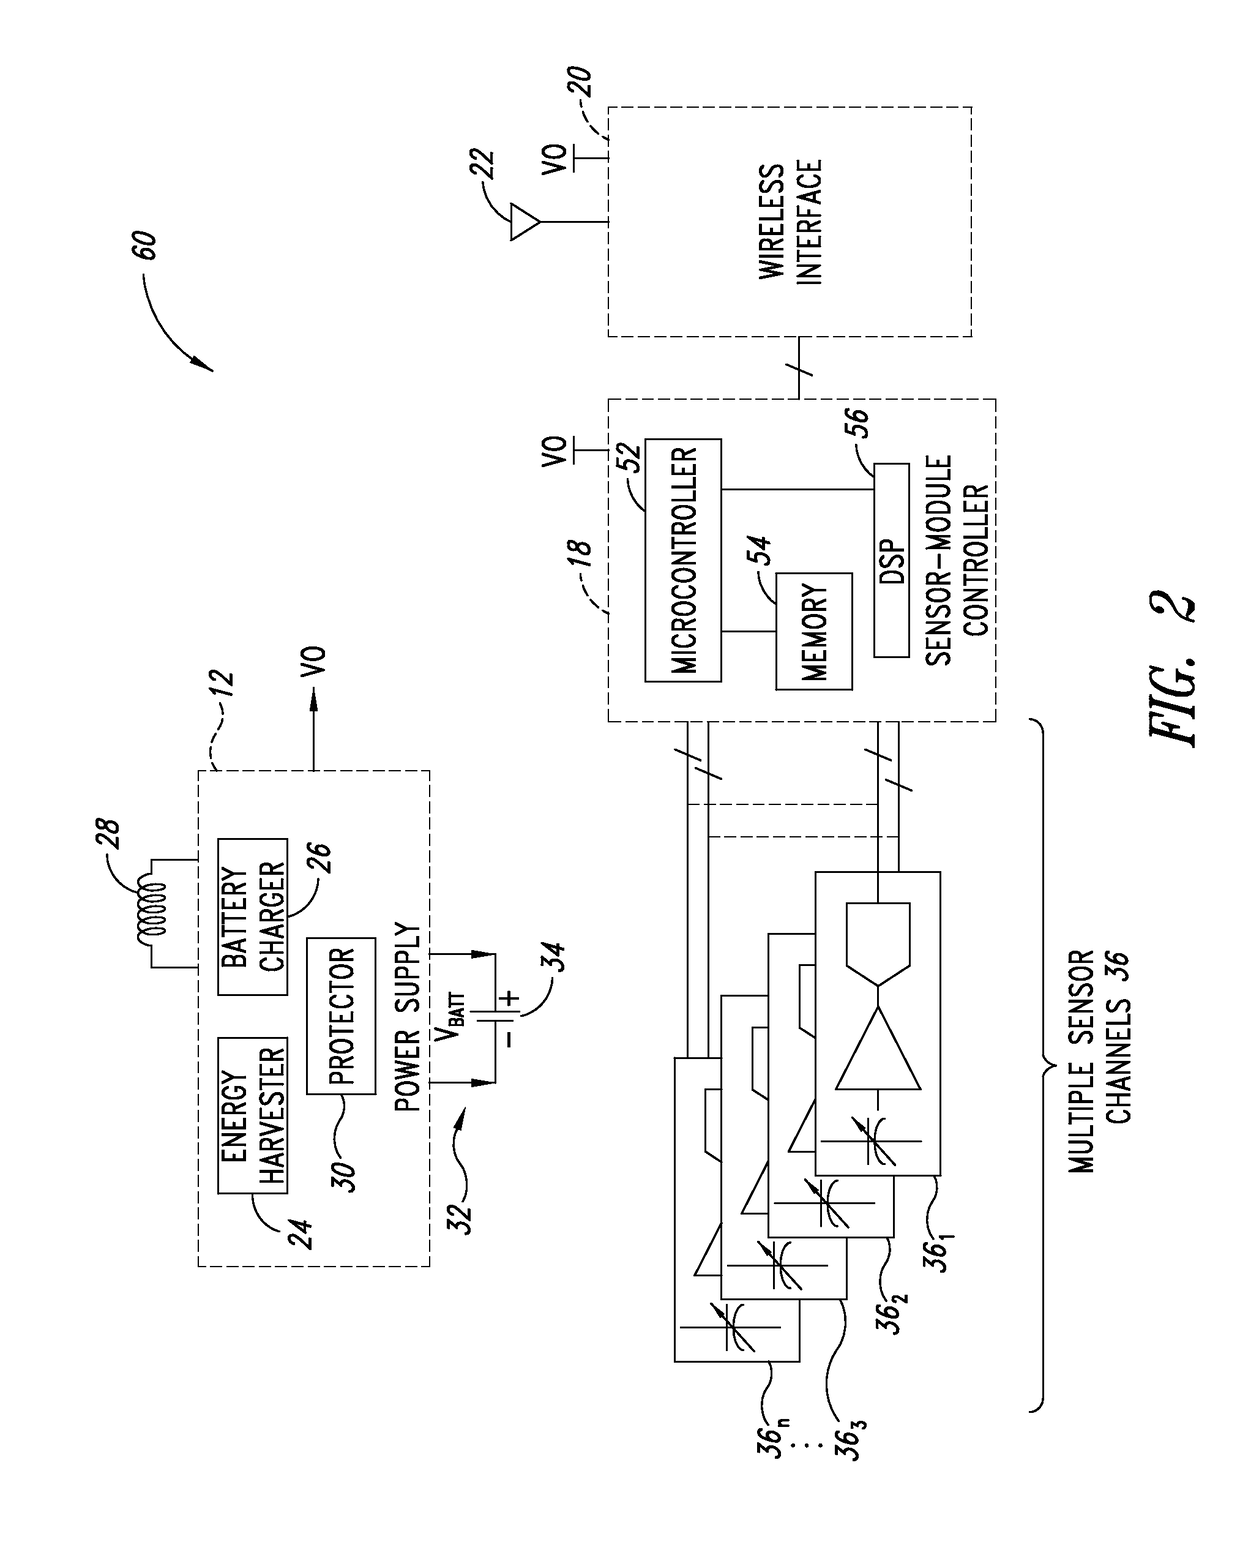 Devices, systems and methods for using and monitoring medical devices